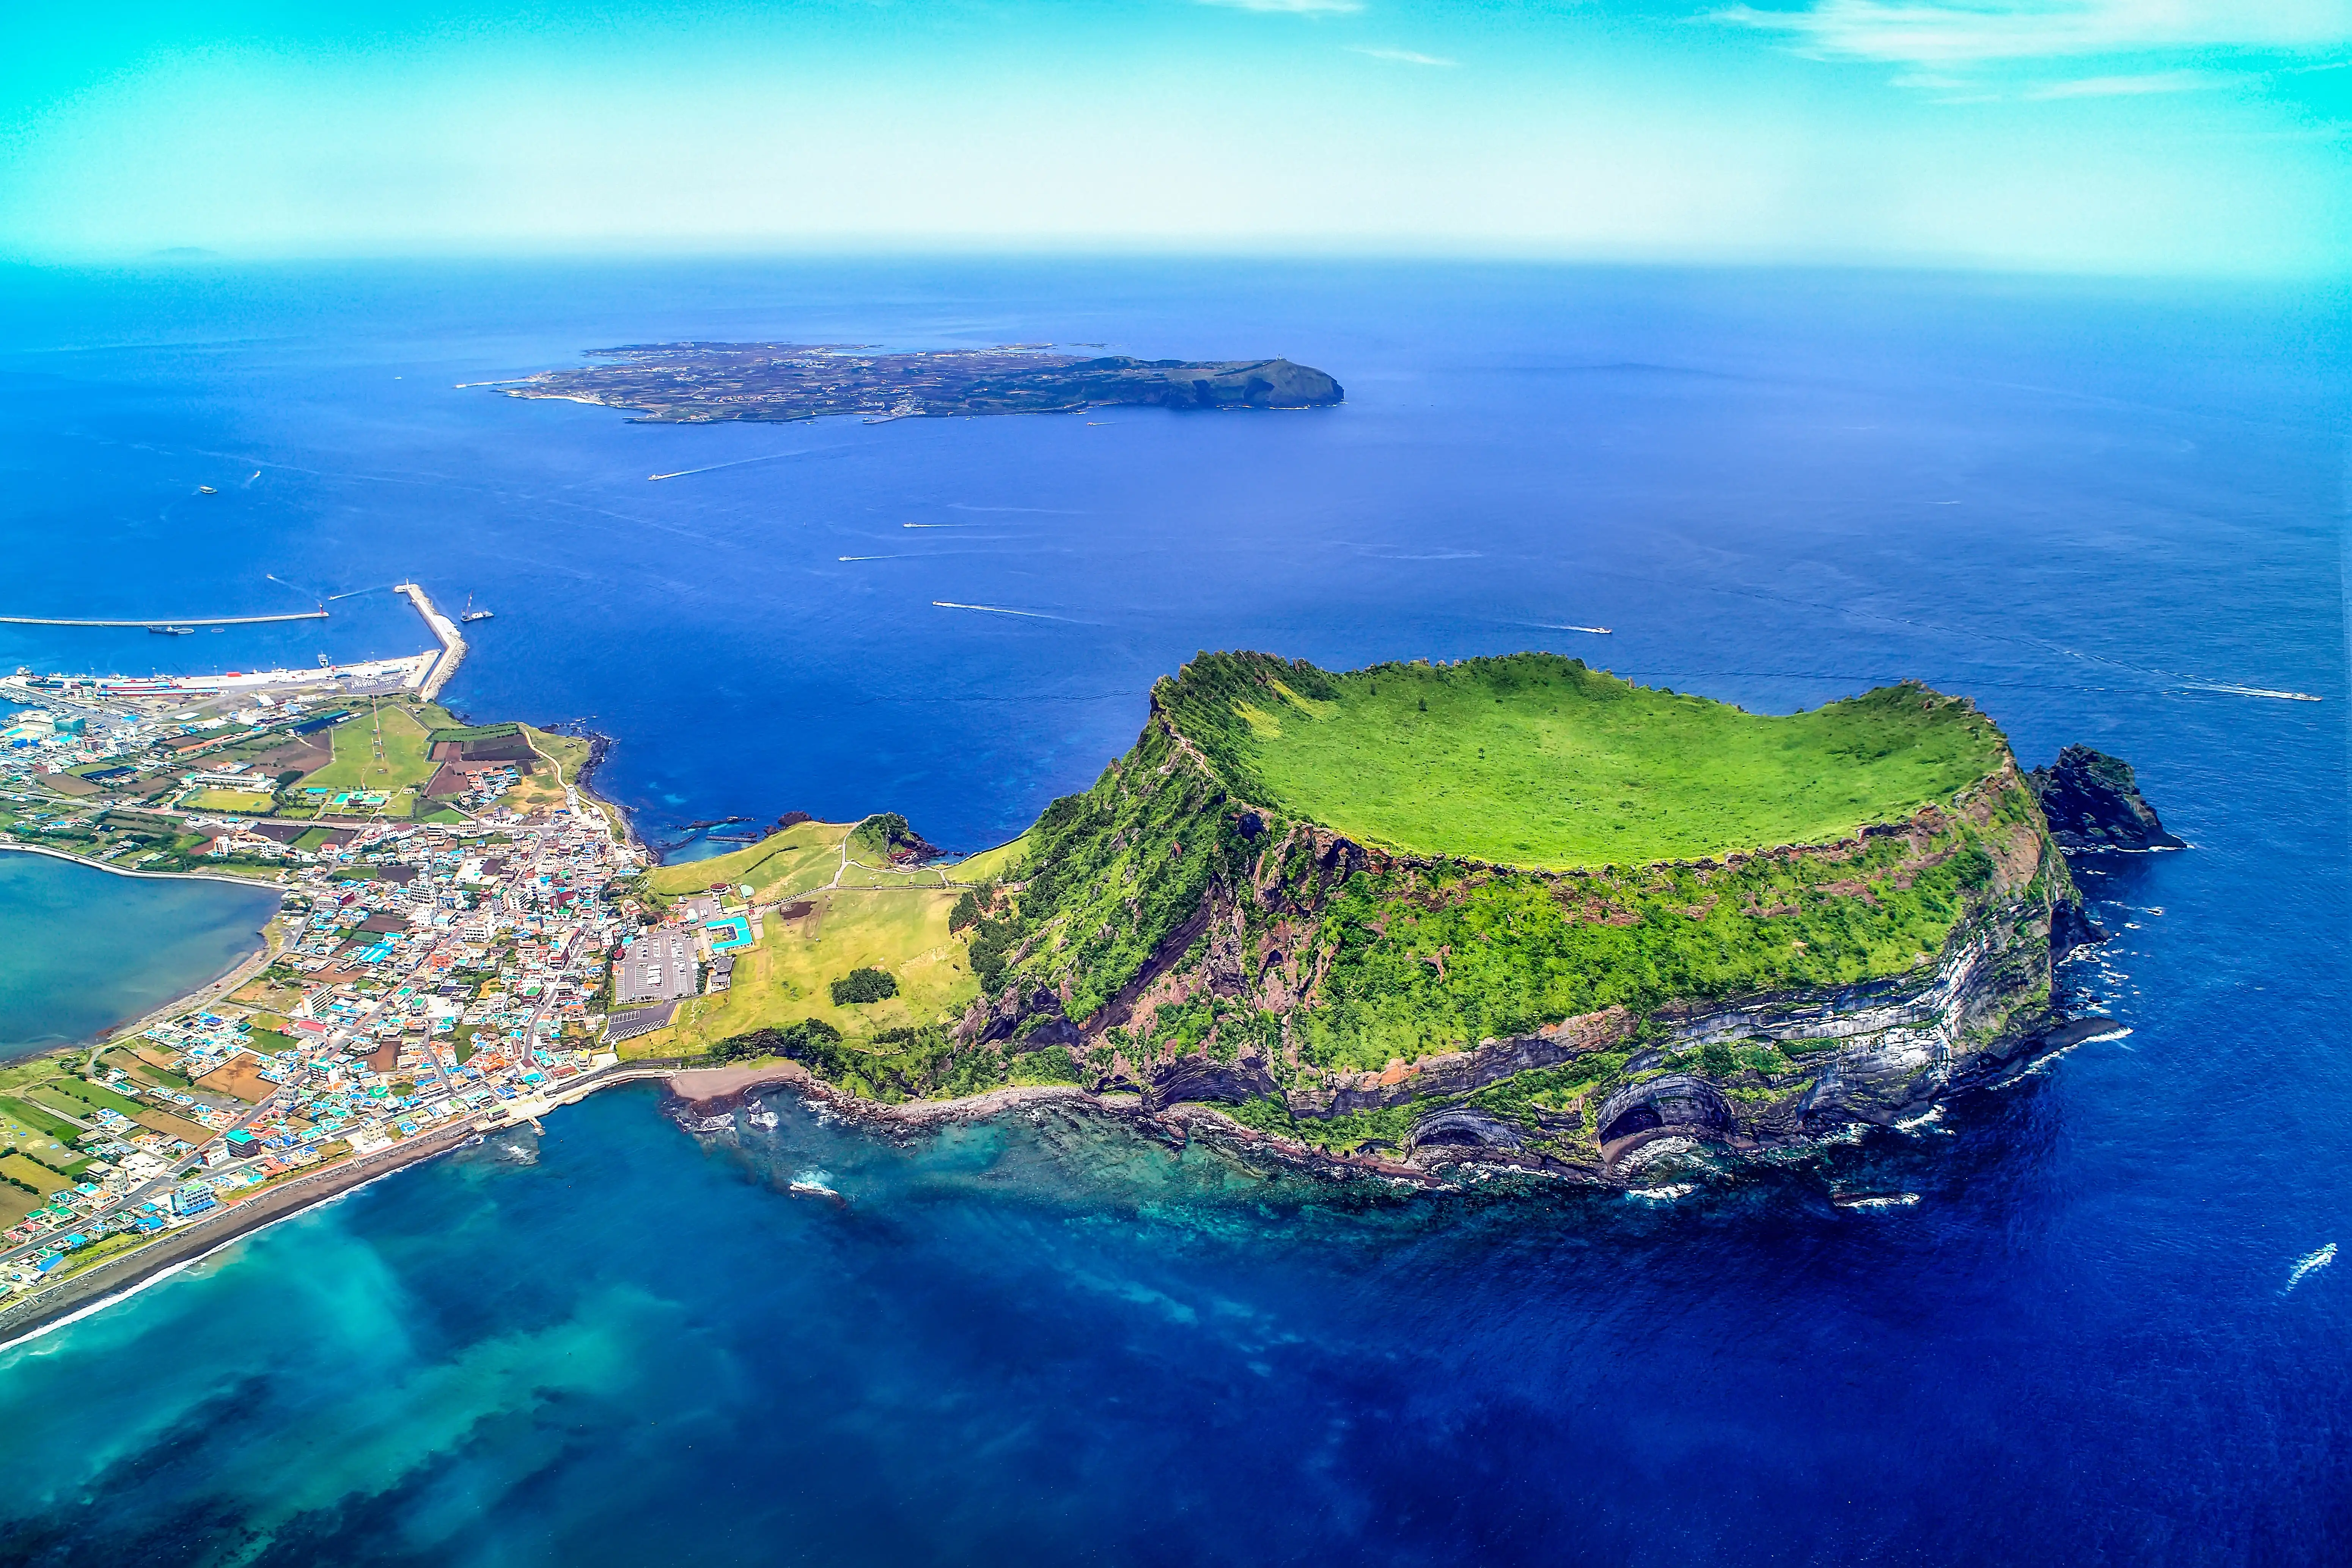 Aerial view of Seongsanilchulbong Cliff (Korea Natural Monument 420, UNESCO World Heritage Site) and Udo Island (Famous travel destination) in Jeju Island